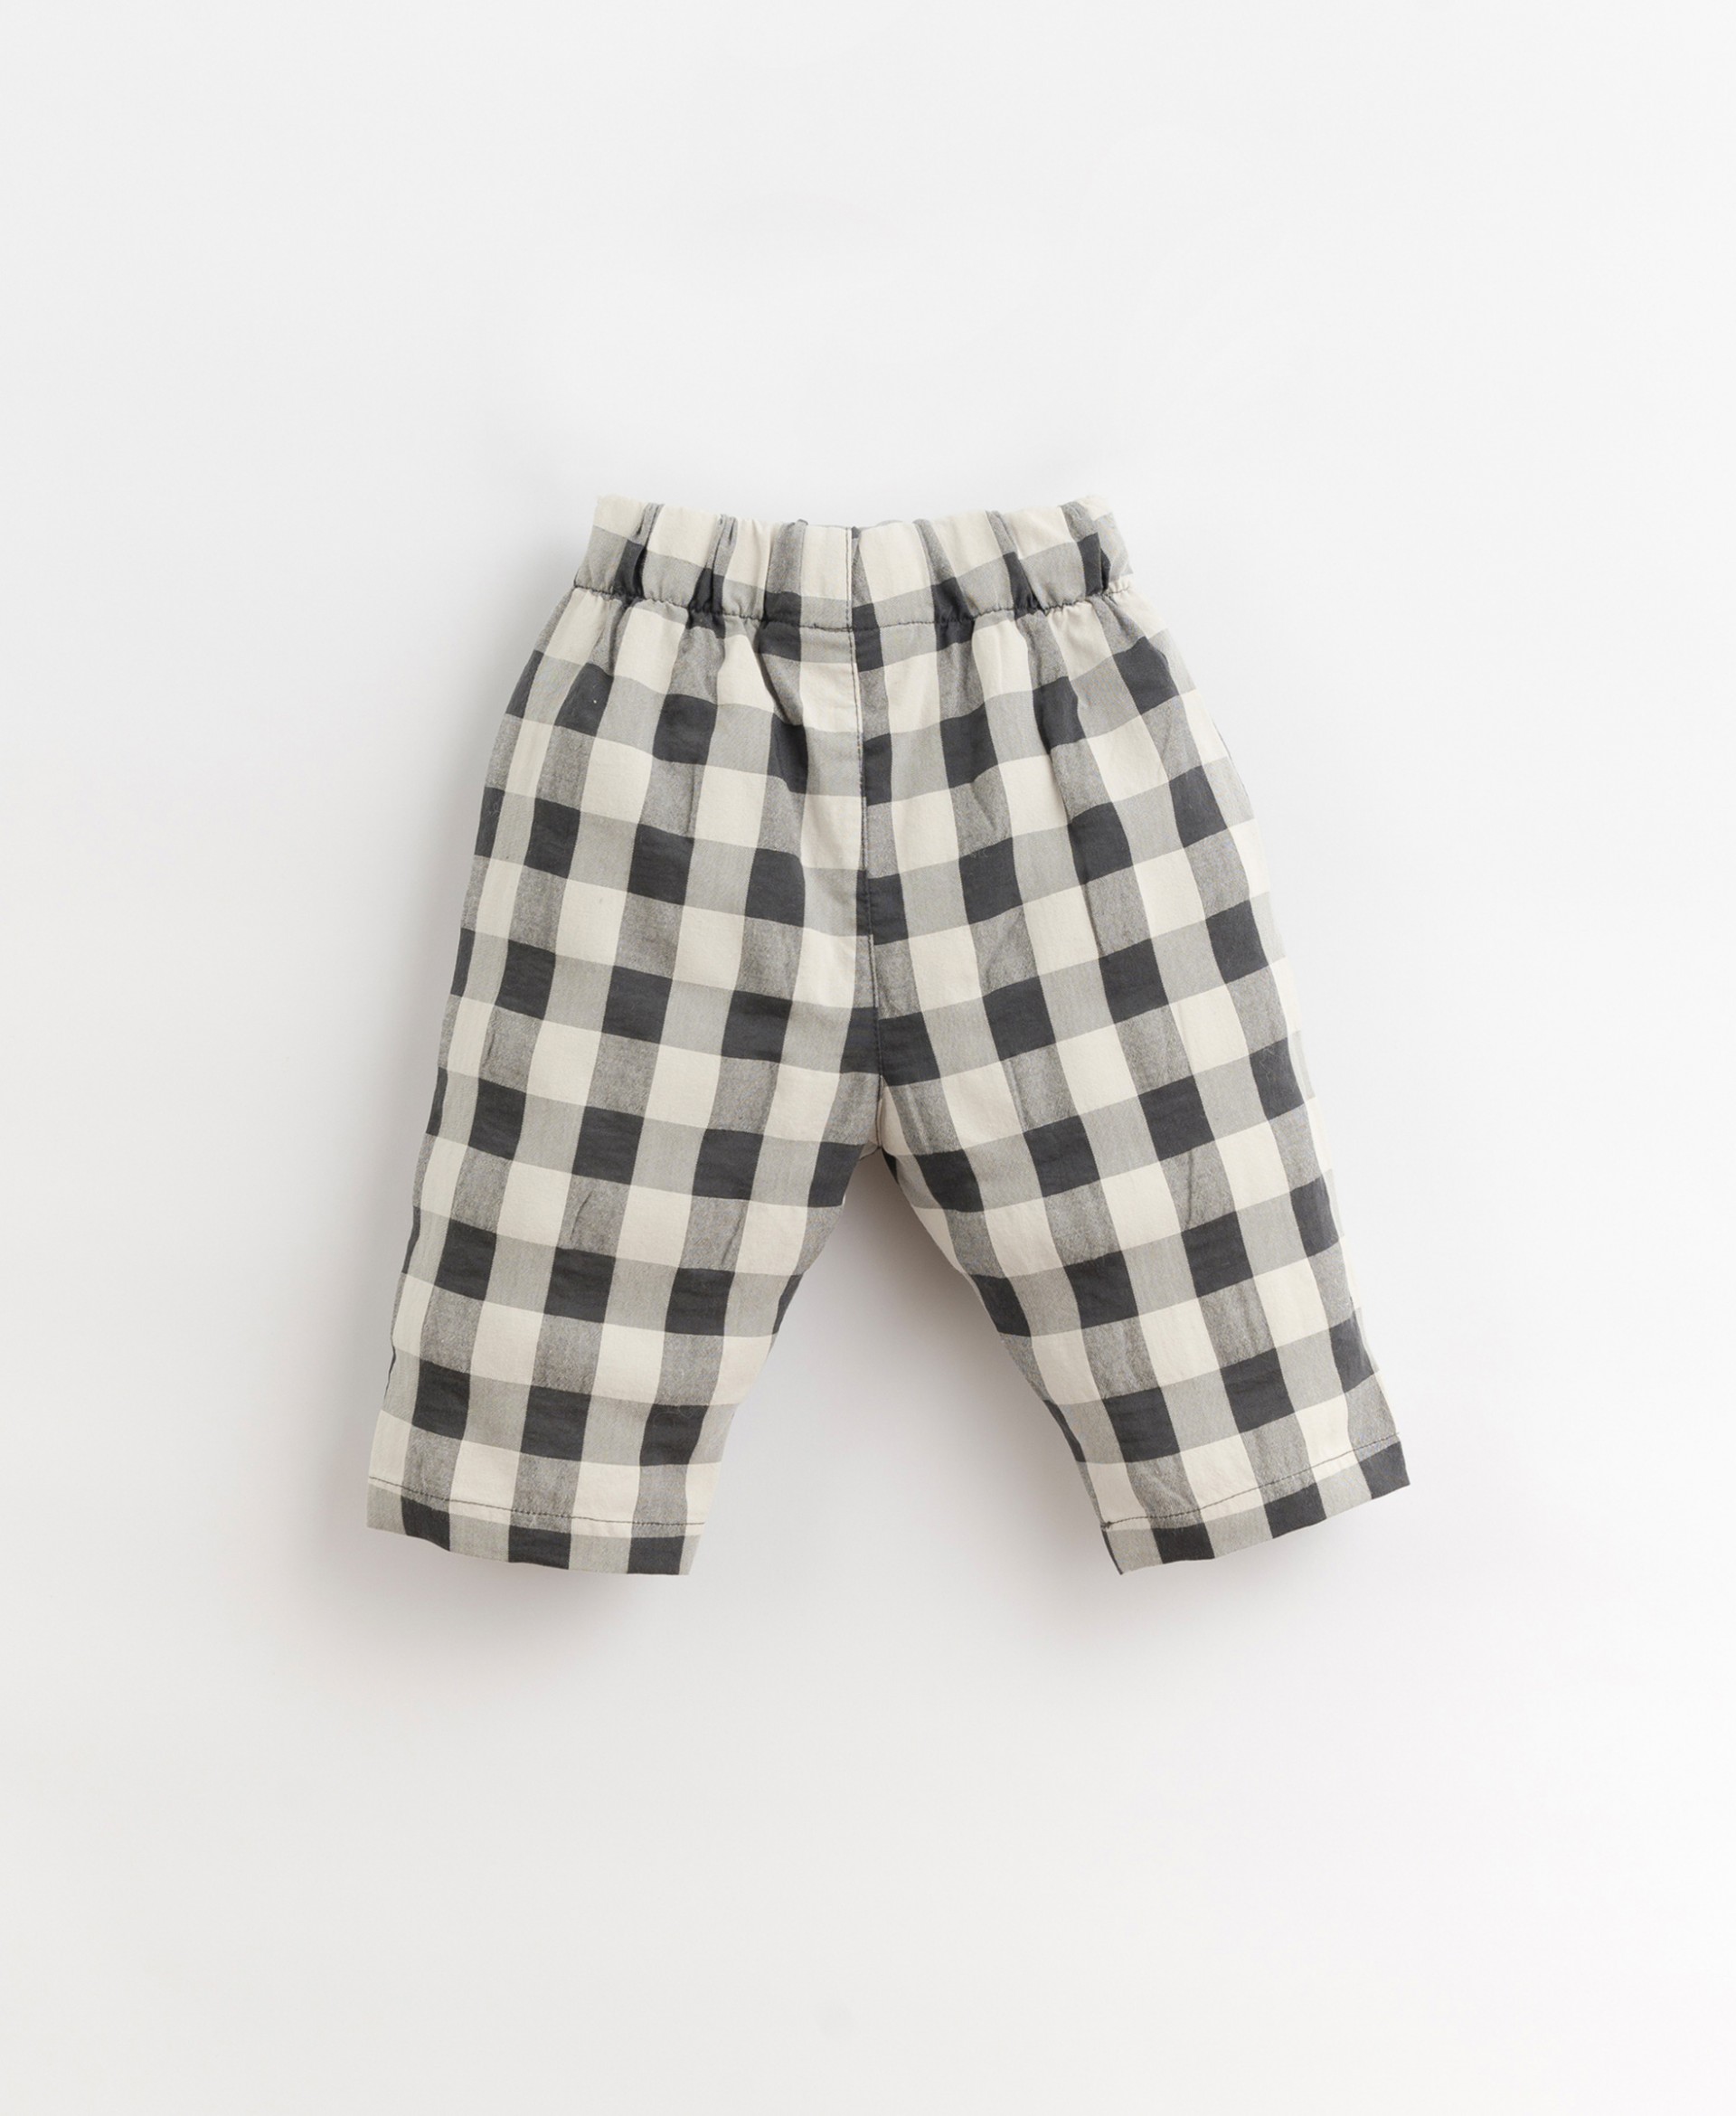 Woven trousers with vichy pattern | Organic Care